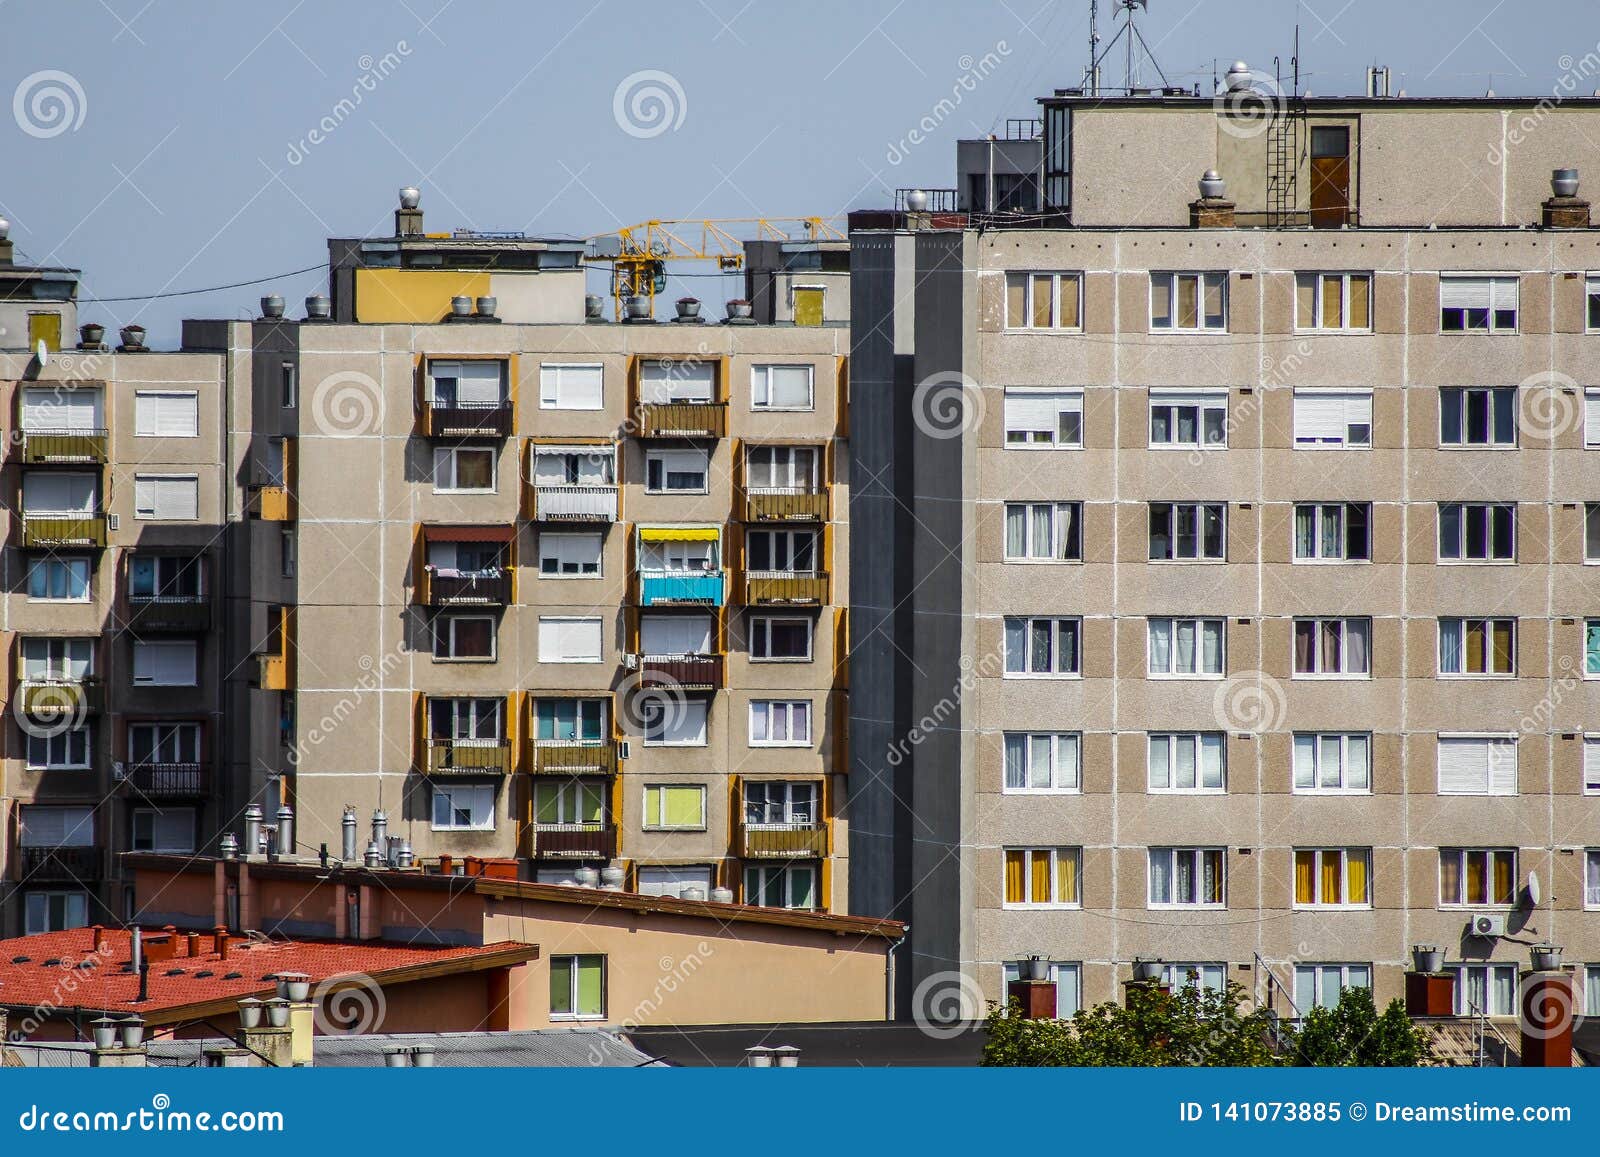 the crowded agglomeration flats